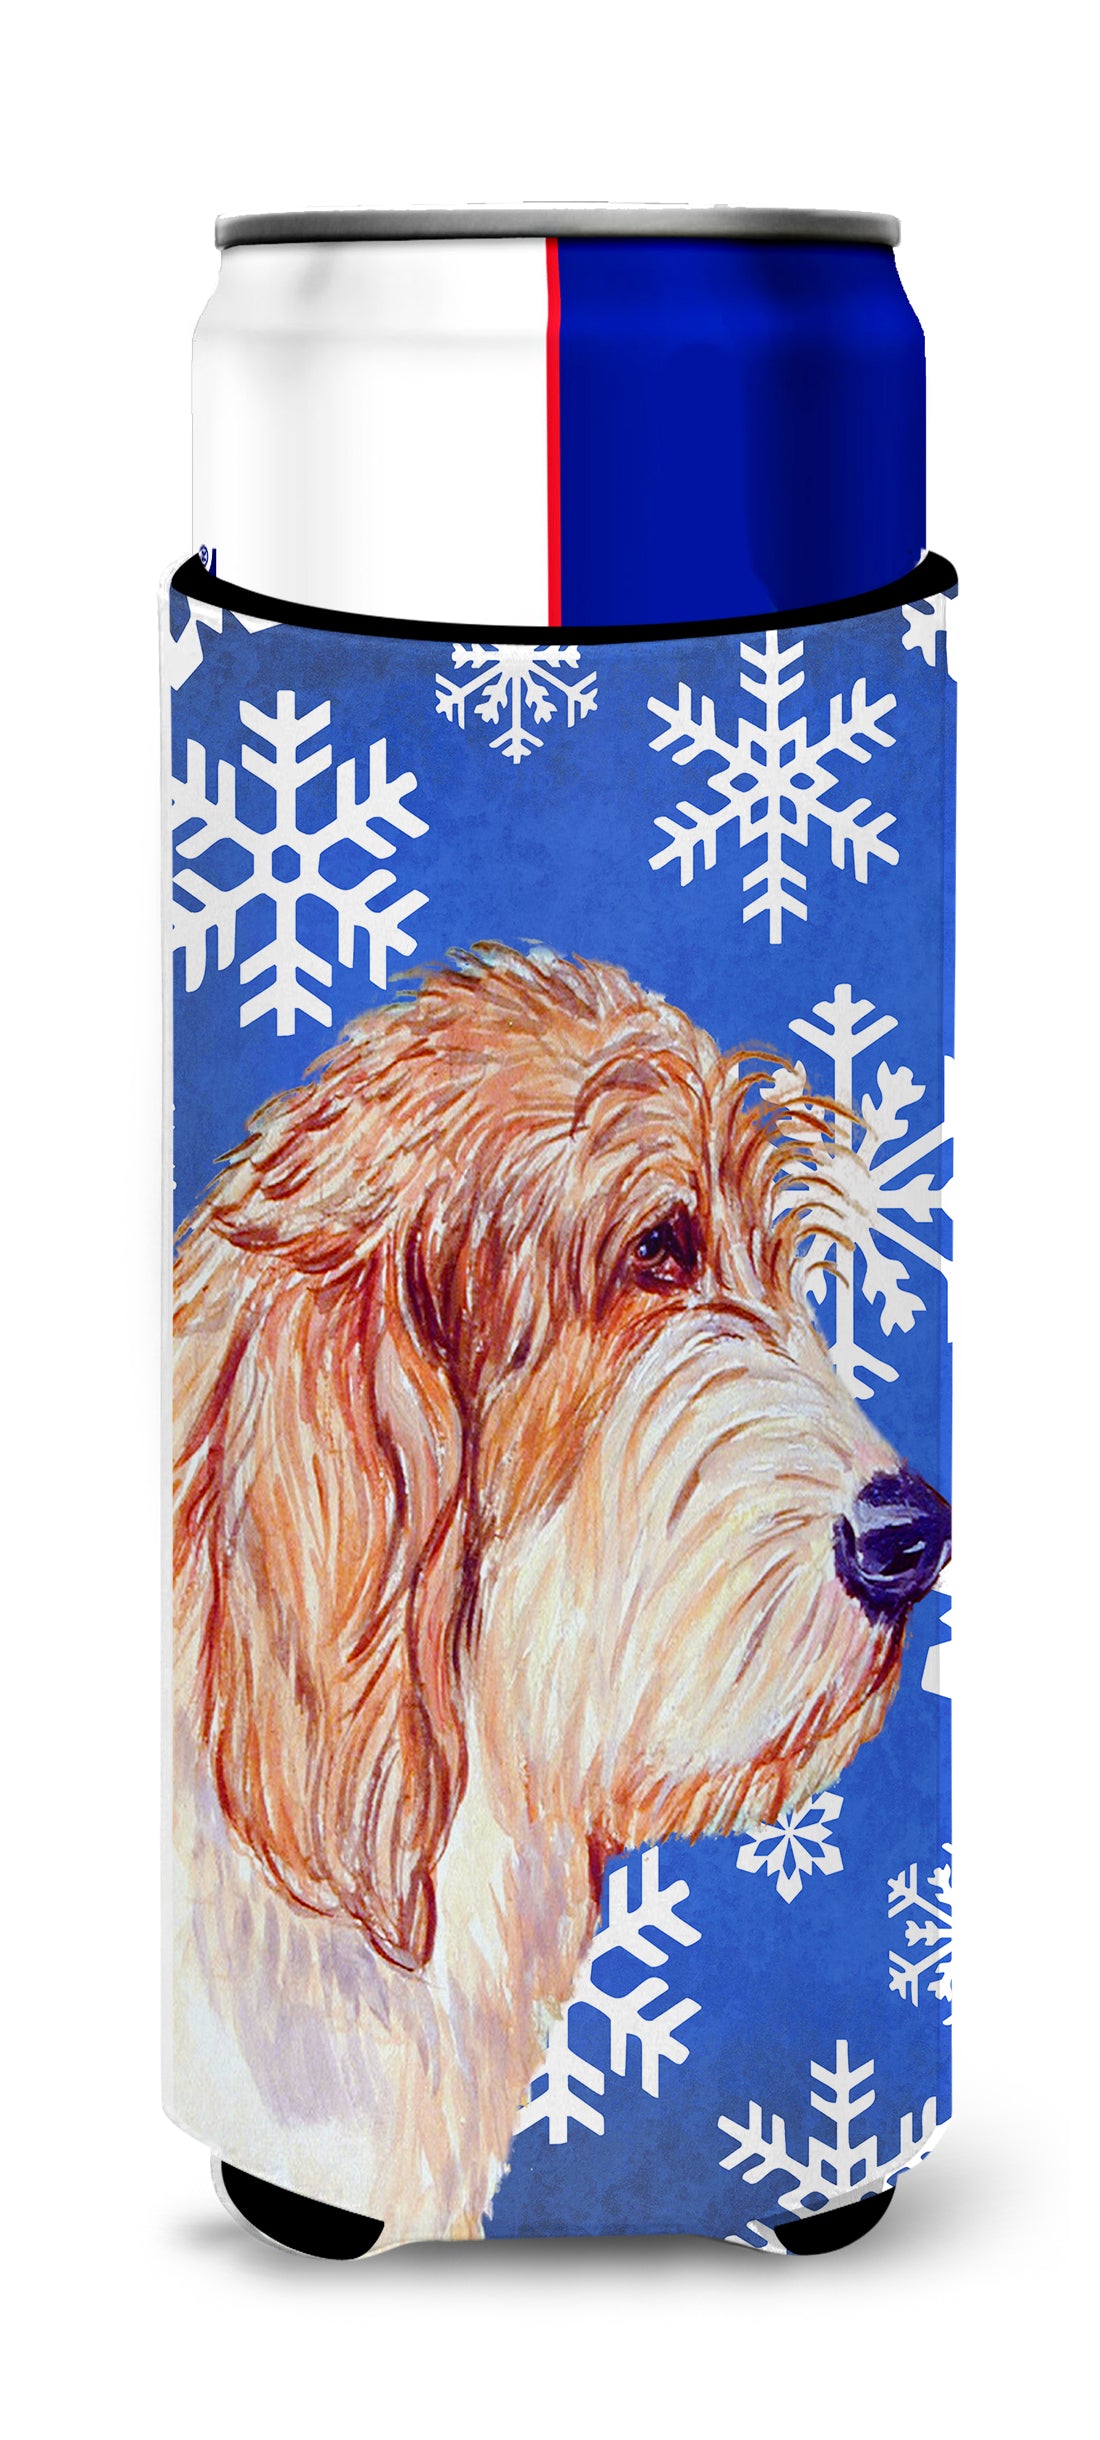 Petit Basset Griffon Vendeen Winter Snowflakes Holiday Ultra Beverage Insulators for slim cans LH9307MUK.